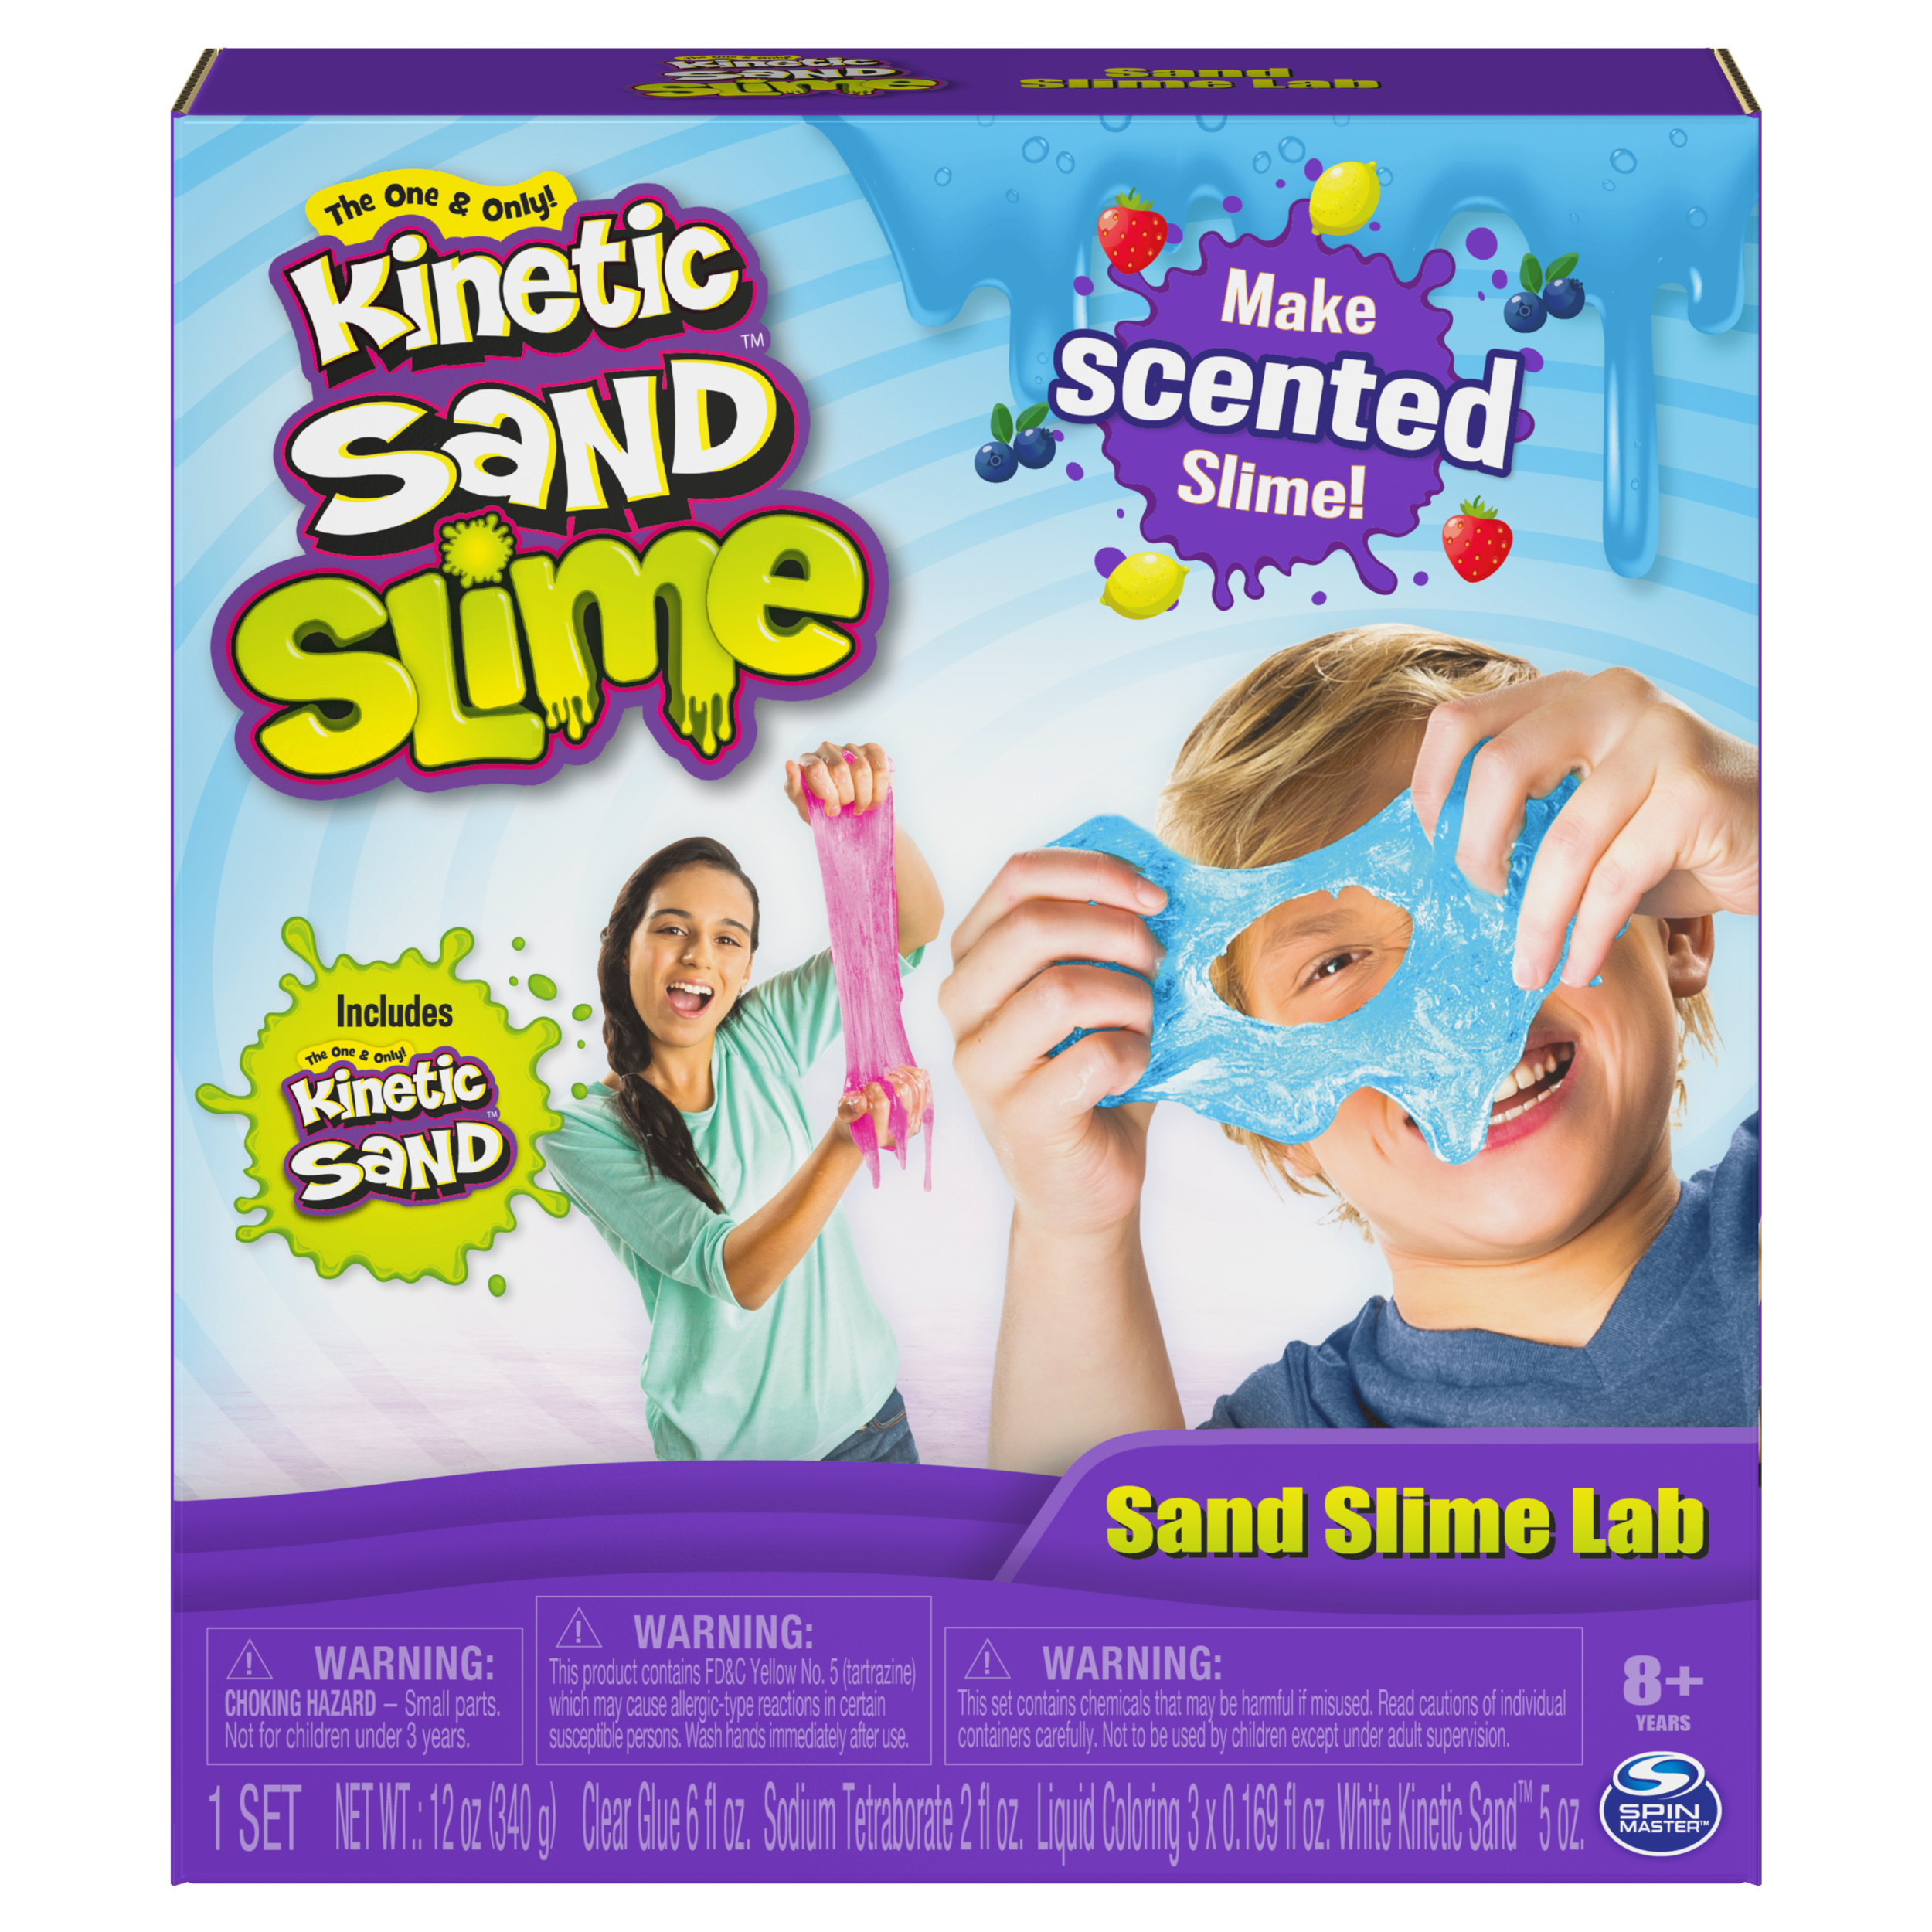 Kinetic Sand, Sand Slime Lab with Scents, All-in-One Slime Activity Kit, for Kids Aged 8 and up (Edition May Vary) - image 1 of 8